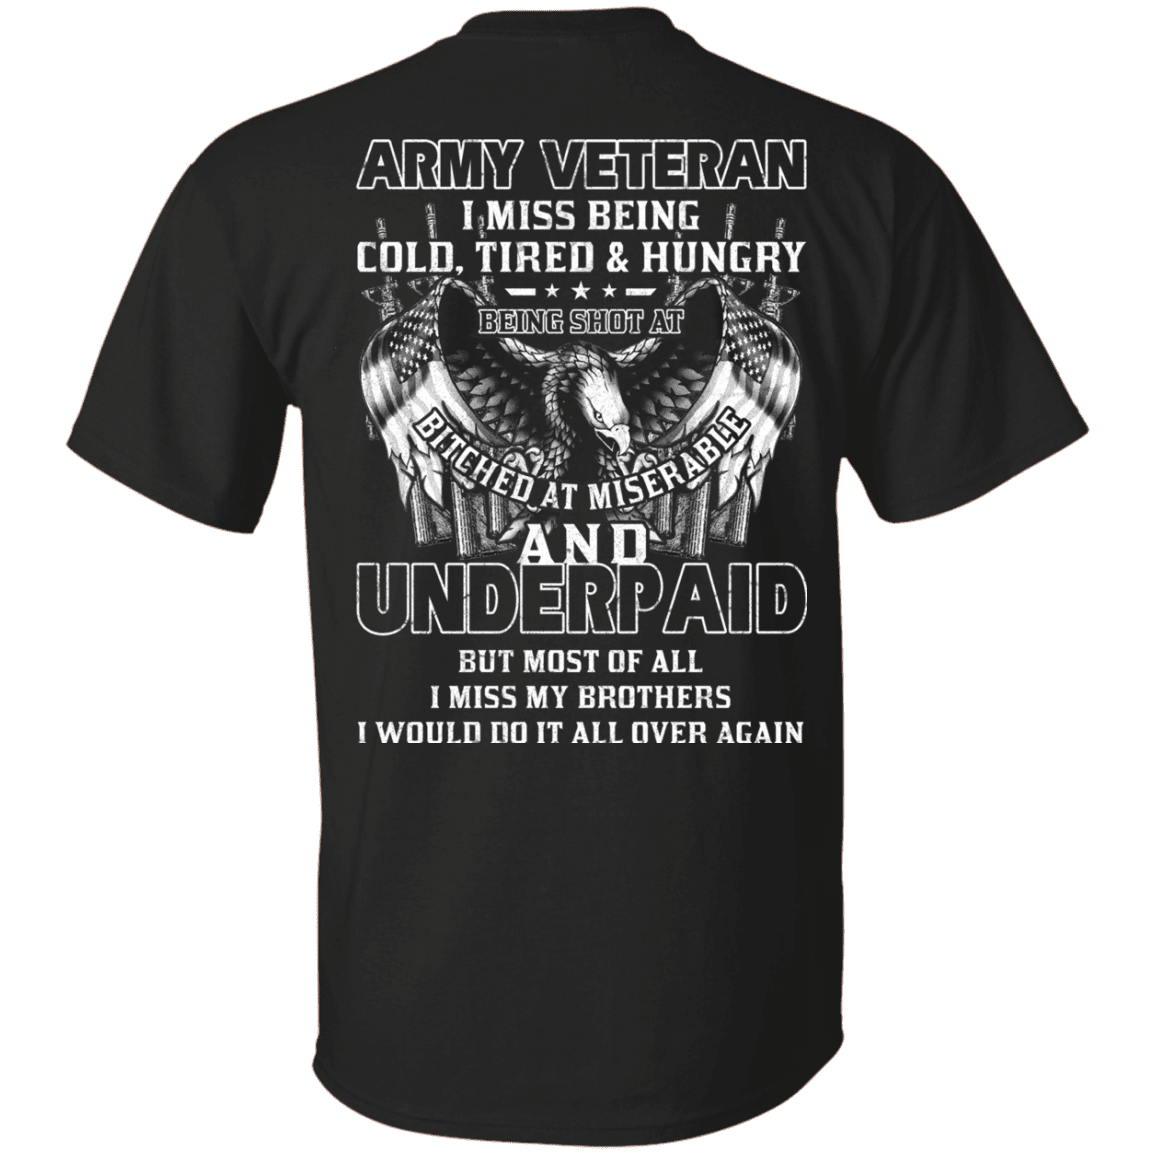 Army Veteran Underpaid Miss My Brothers Men Back T Shirts-TShirt-Army-Veterans Nation